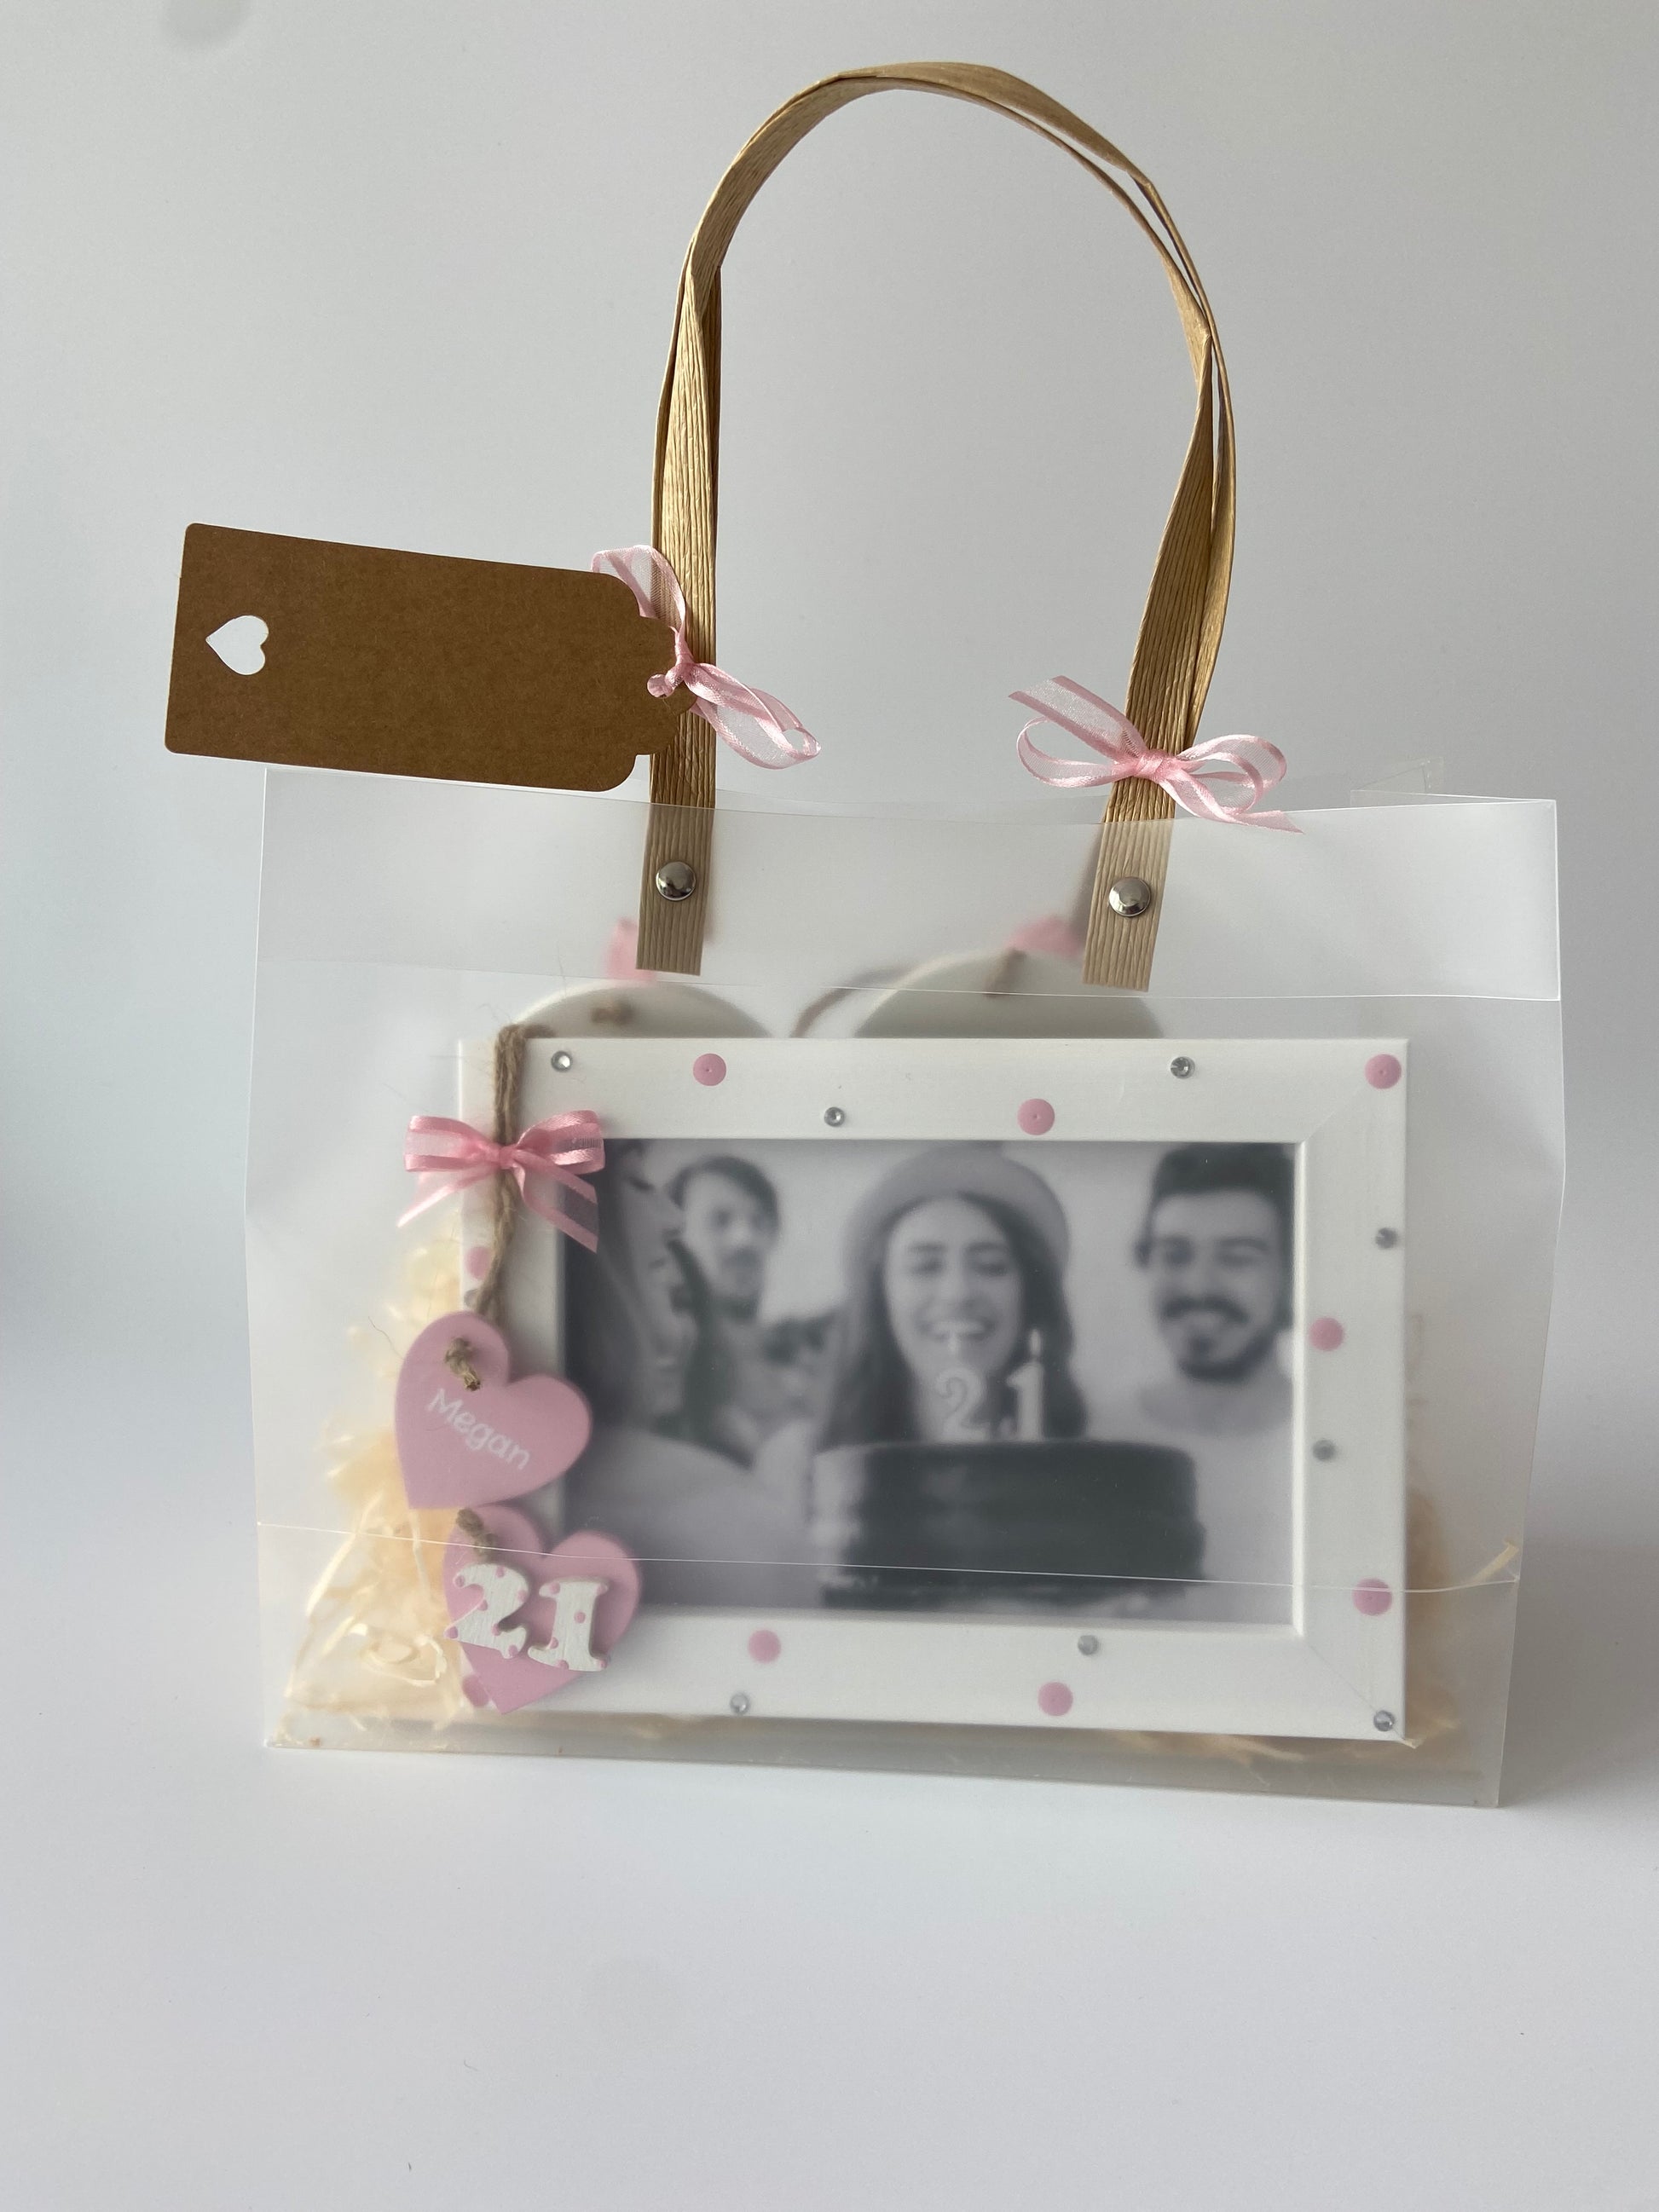 Image shows 21st photo frame included in the gift set, decorated with polka dots, gems and ribbon.